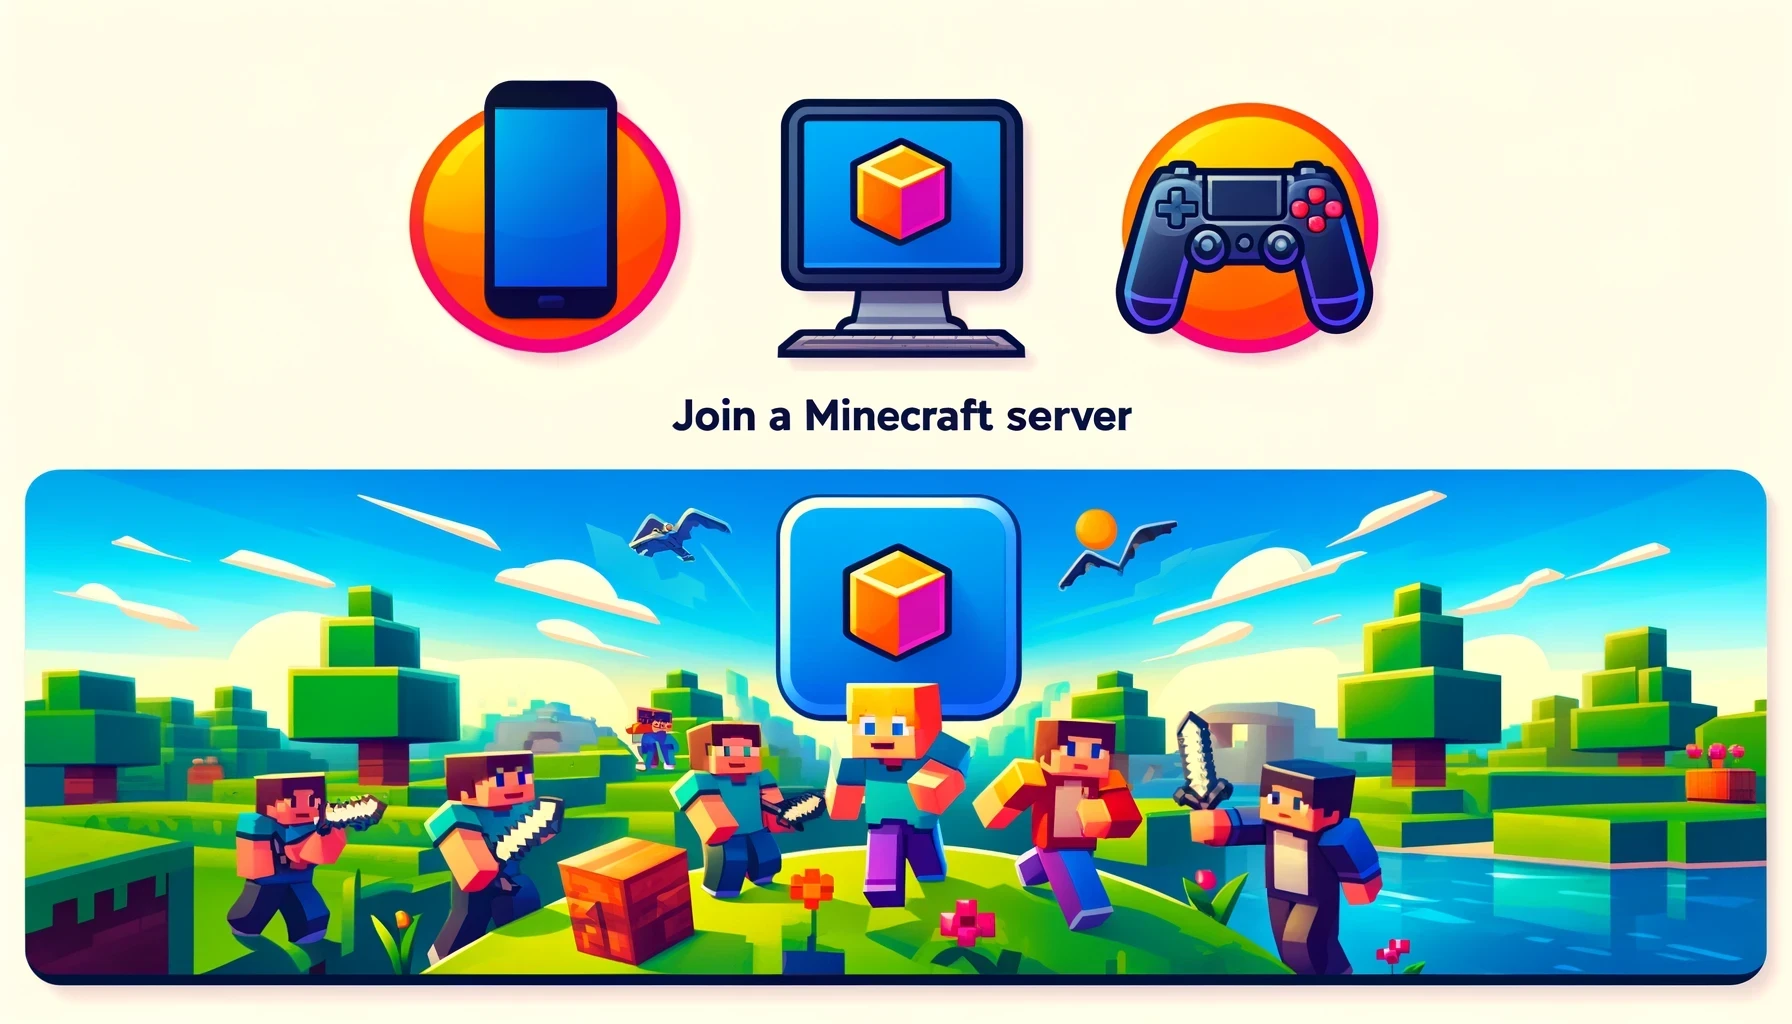 How To Join A Minecraft Server Image